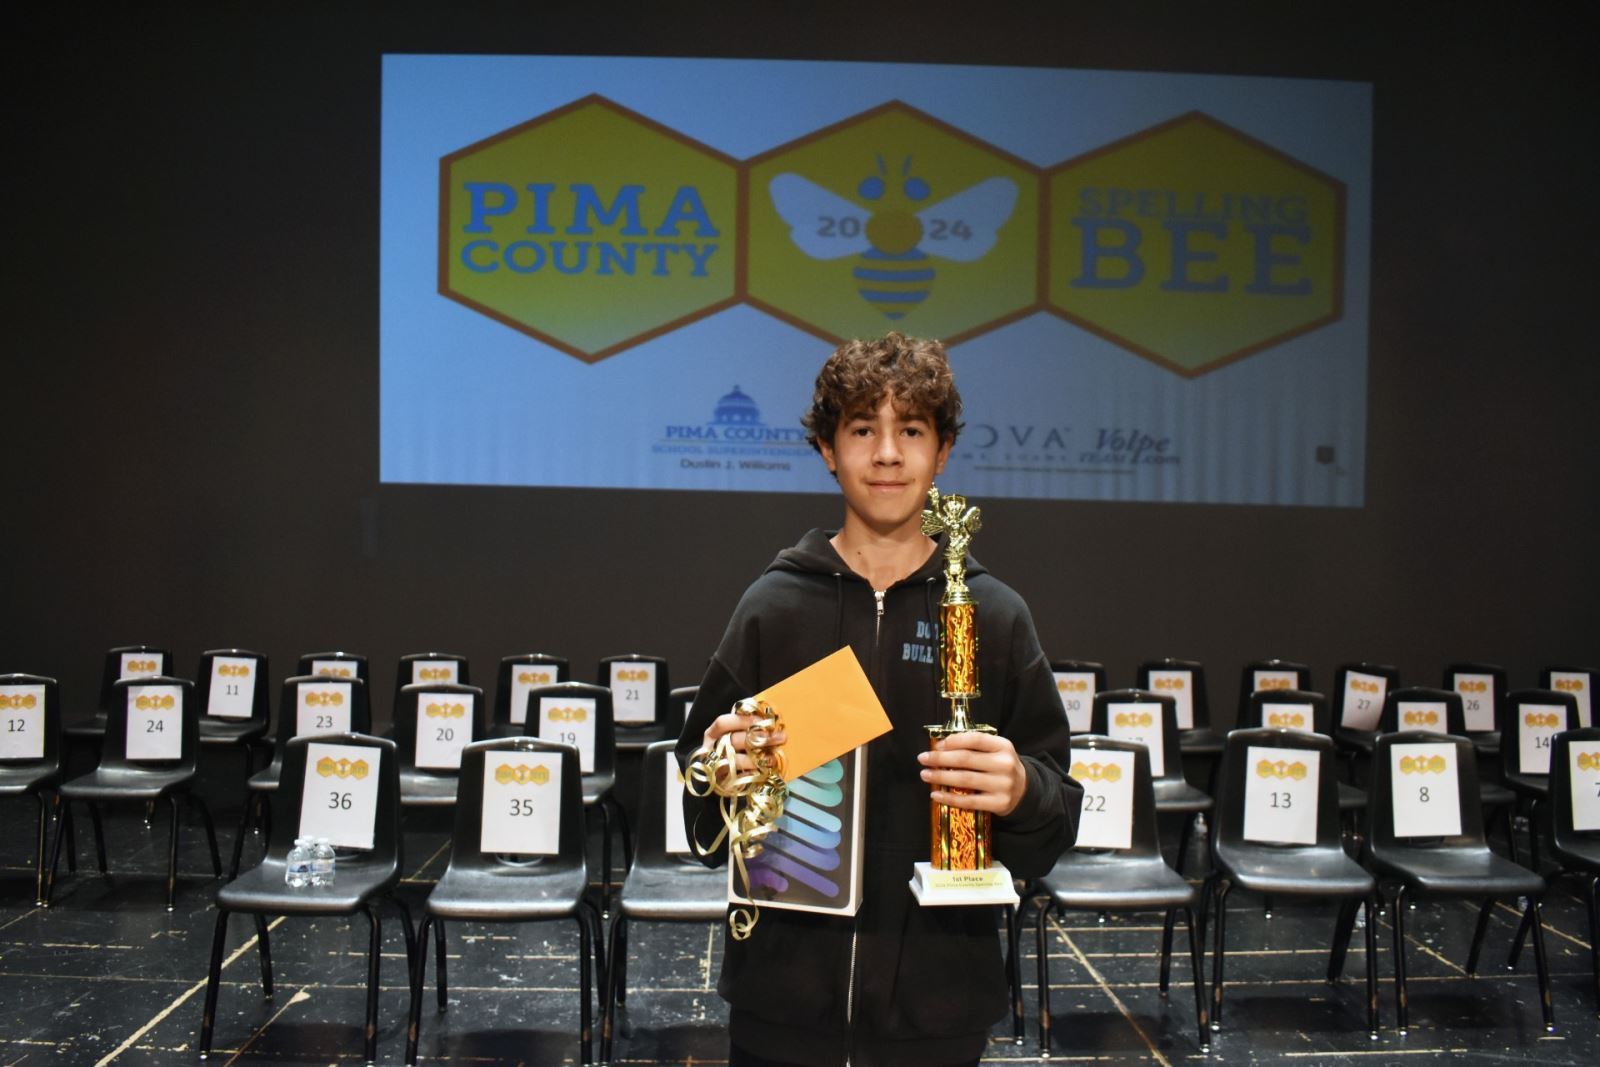 Ricardo Cabrera poses with his trophy for winning the Pima County Spelling Bee!